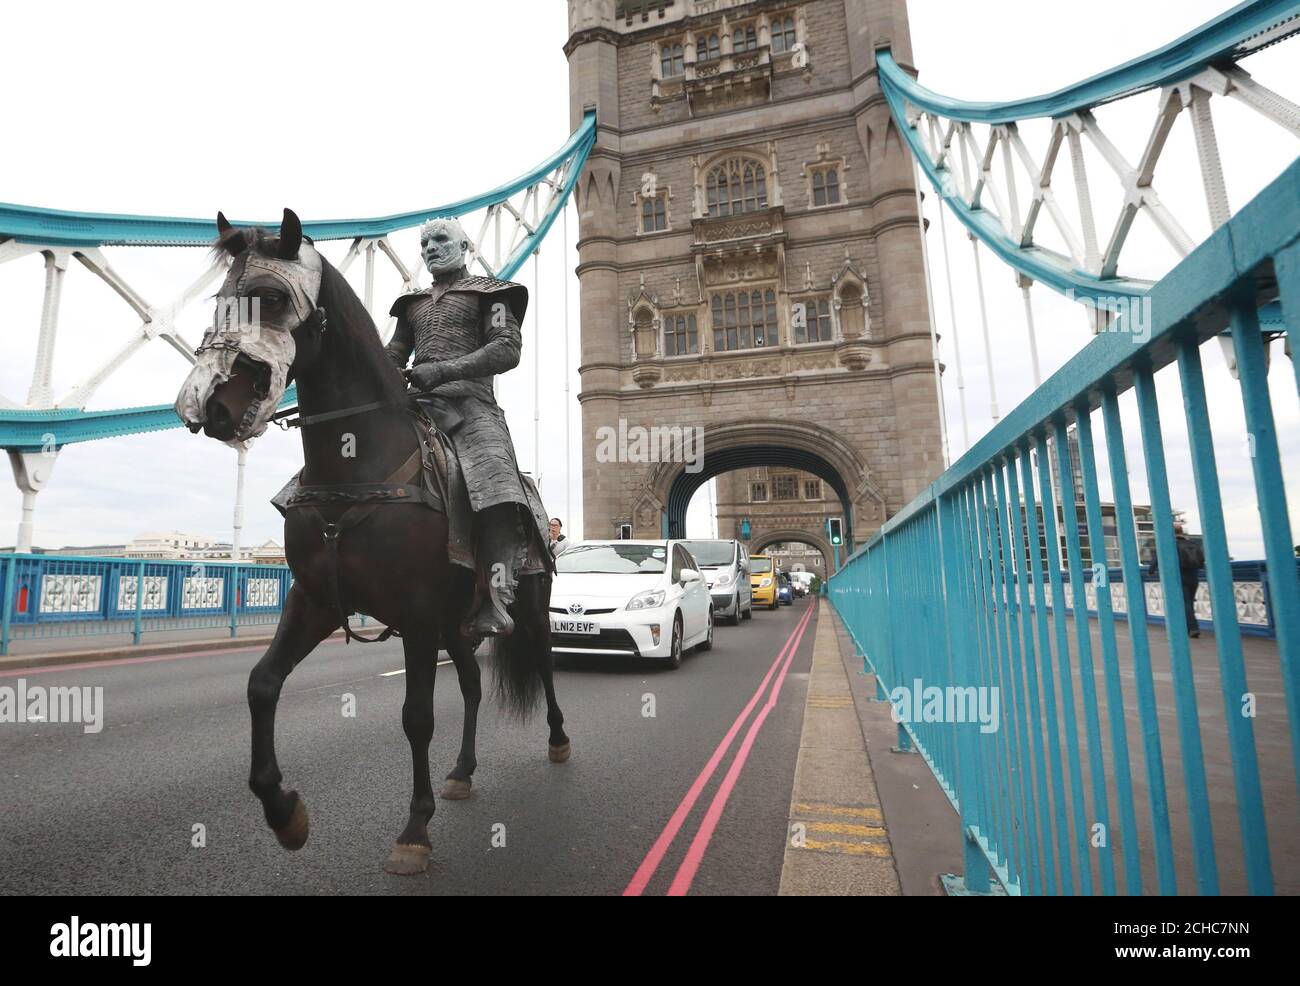 A model on horseback dressed as the Night King of the 'White Walkers' from Game of Thrones, crosses Tower Bridge in London to celebrate the upcoming start of season 7 of the television show, which airs at 9pm on Monday July 17th on Sky Atlantic. Stock Photo